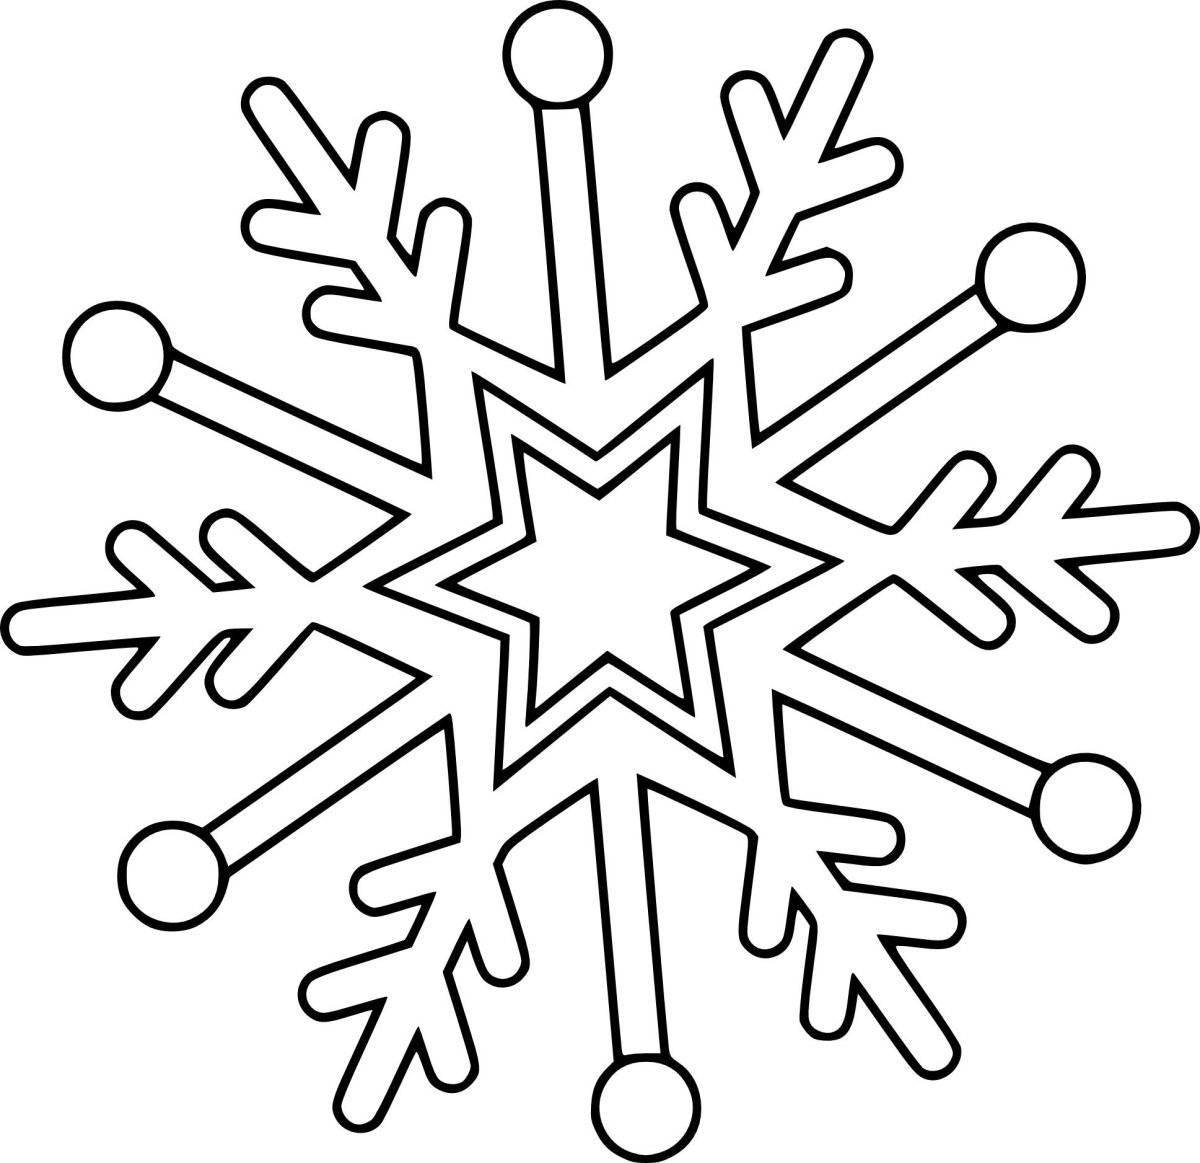 Fun coloring book snowflakes for children 4-5 years old in kindergarten